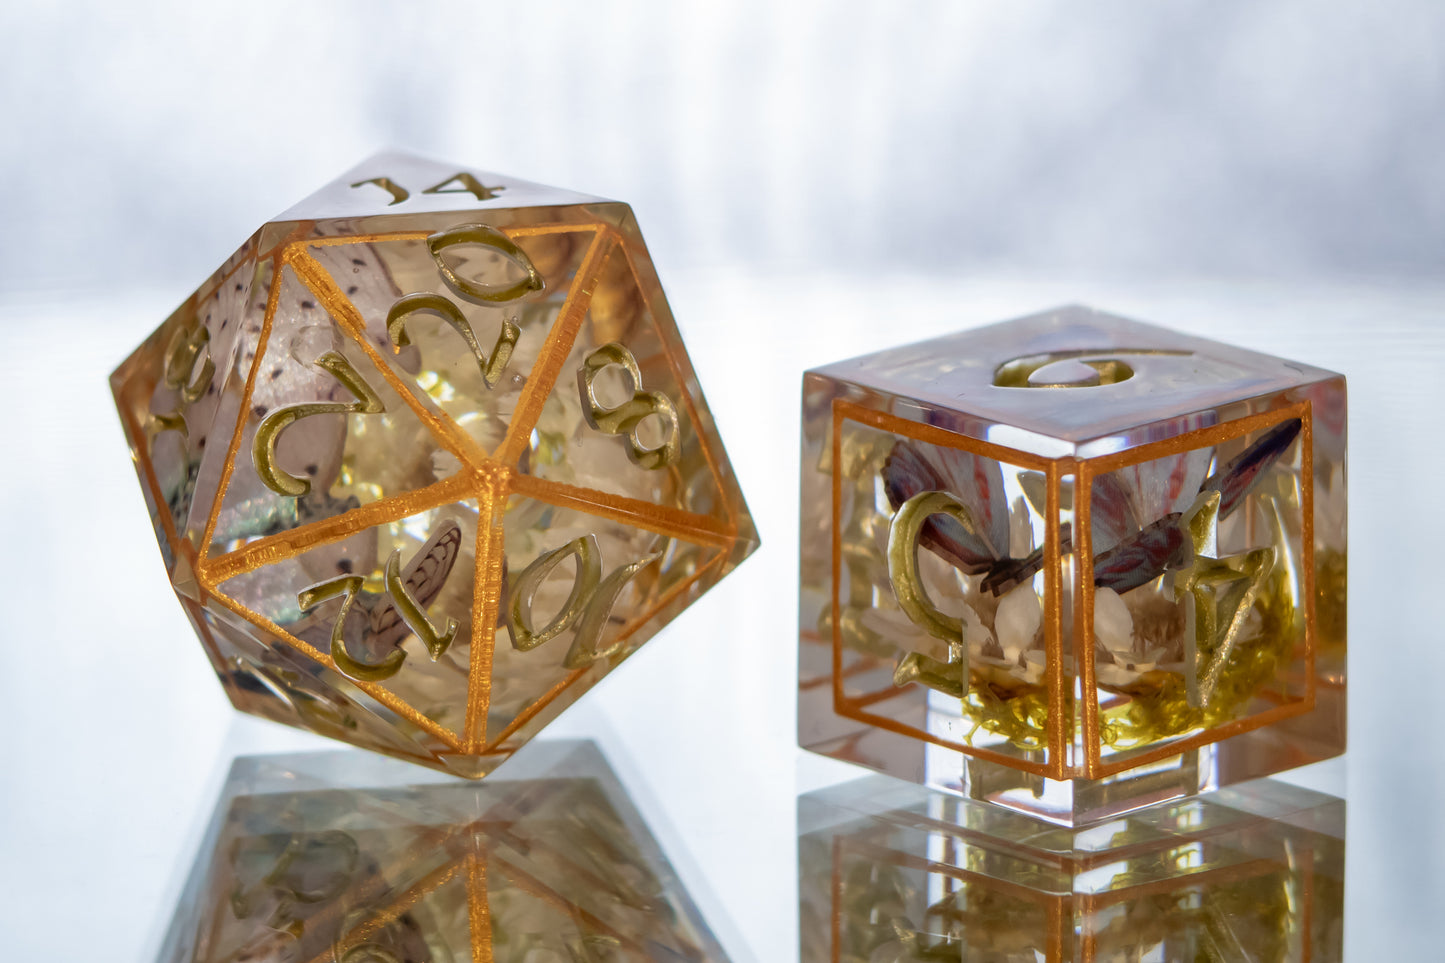 Gold Floral Lepidoptera - 7 Piece Handmade Resin Dice